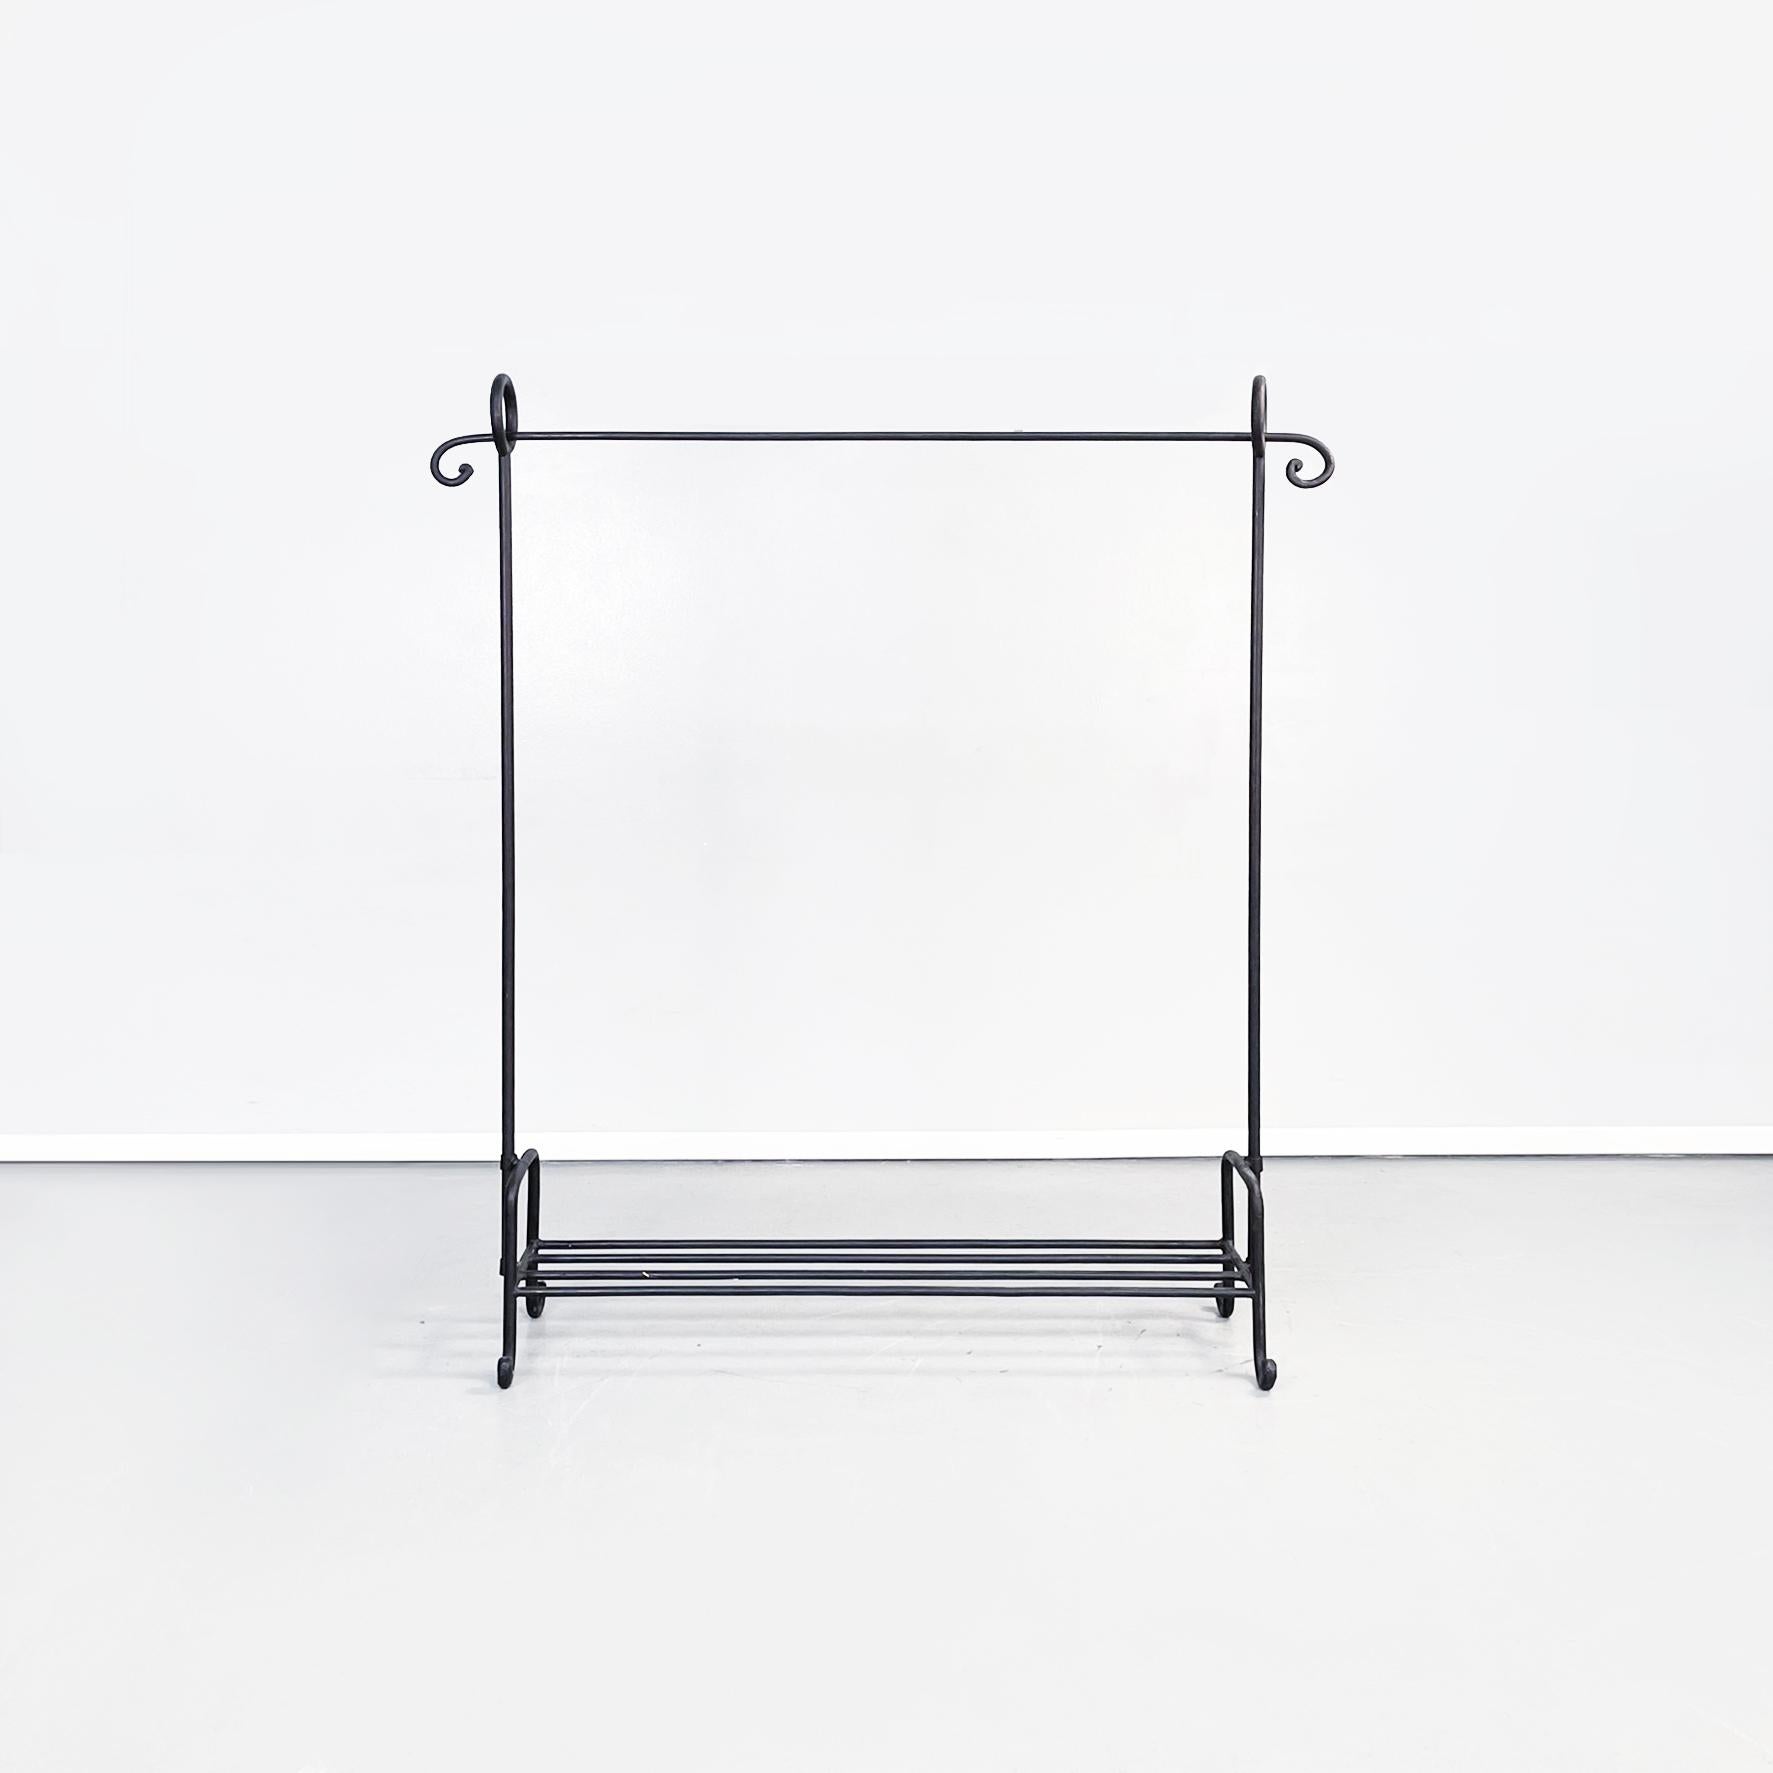 Italian modern Coat stand in black tubular metal, 1990s
Coat stand in black painted tubular metal. The upper bar of the rank rests on two circles, connected to the structure. At the base there is a top, formed by rods of tubular metal, where it is